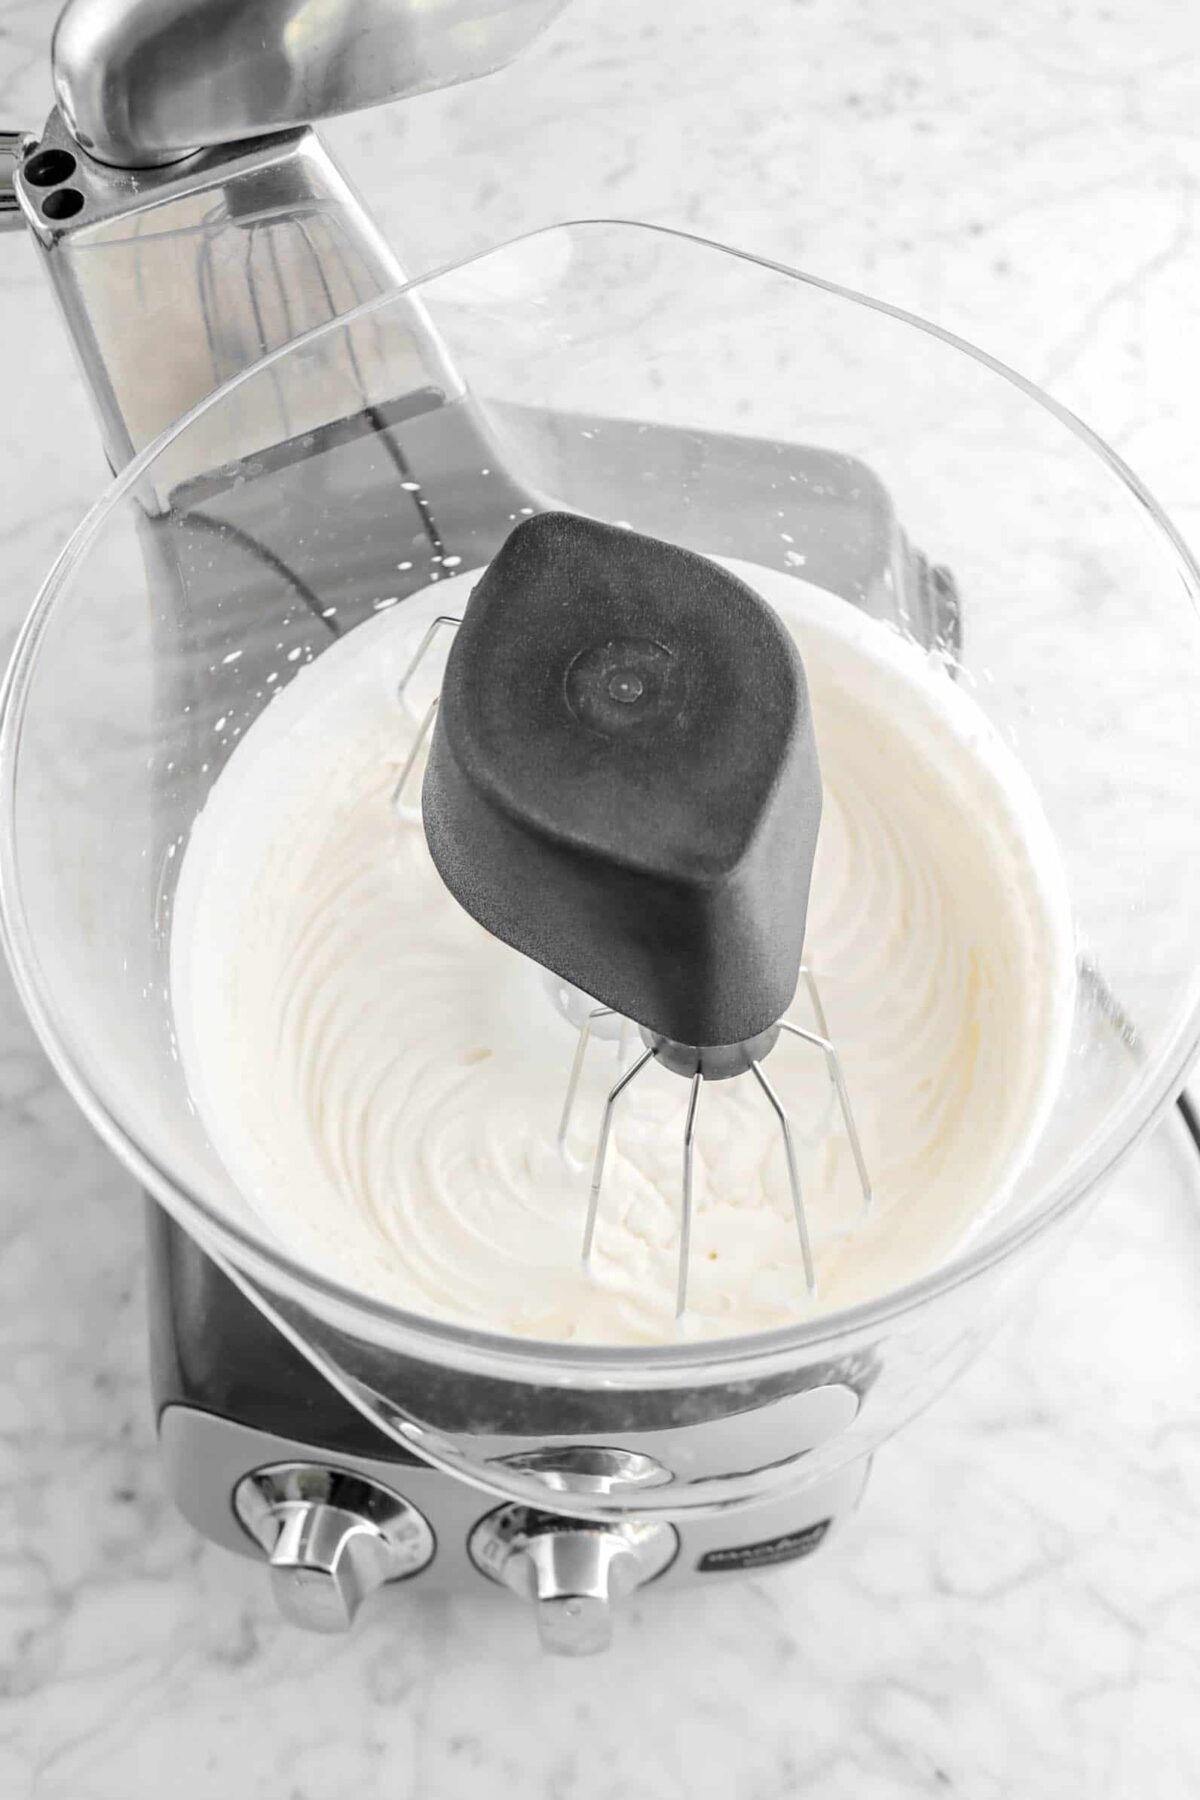 whipped cream in a mixer